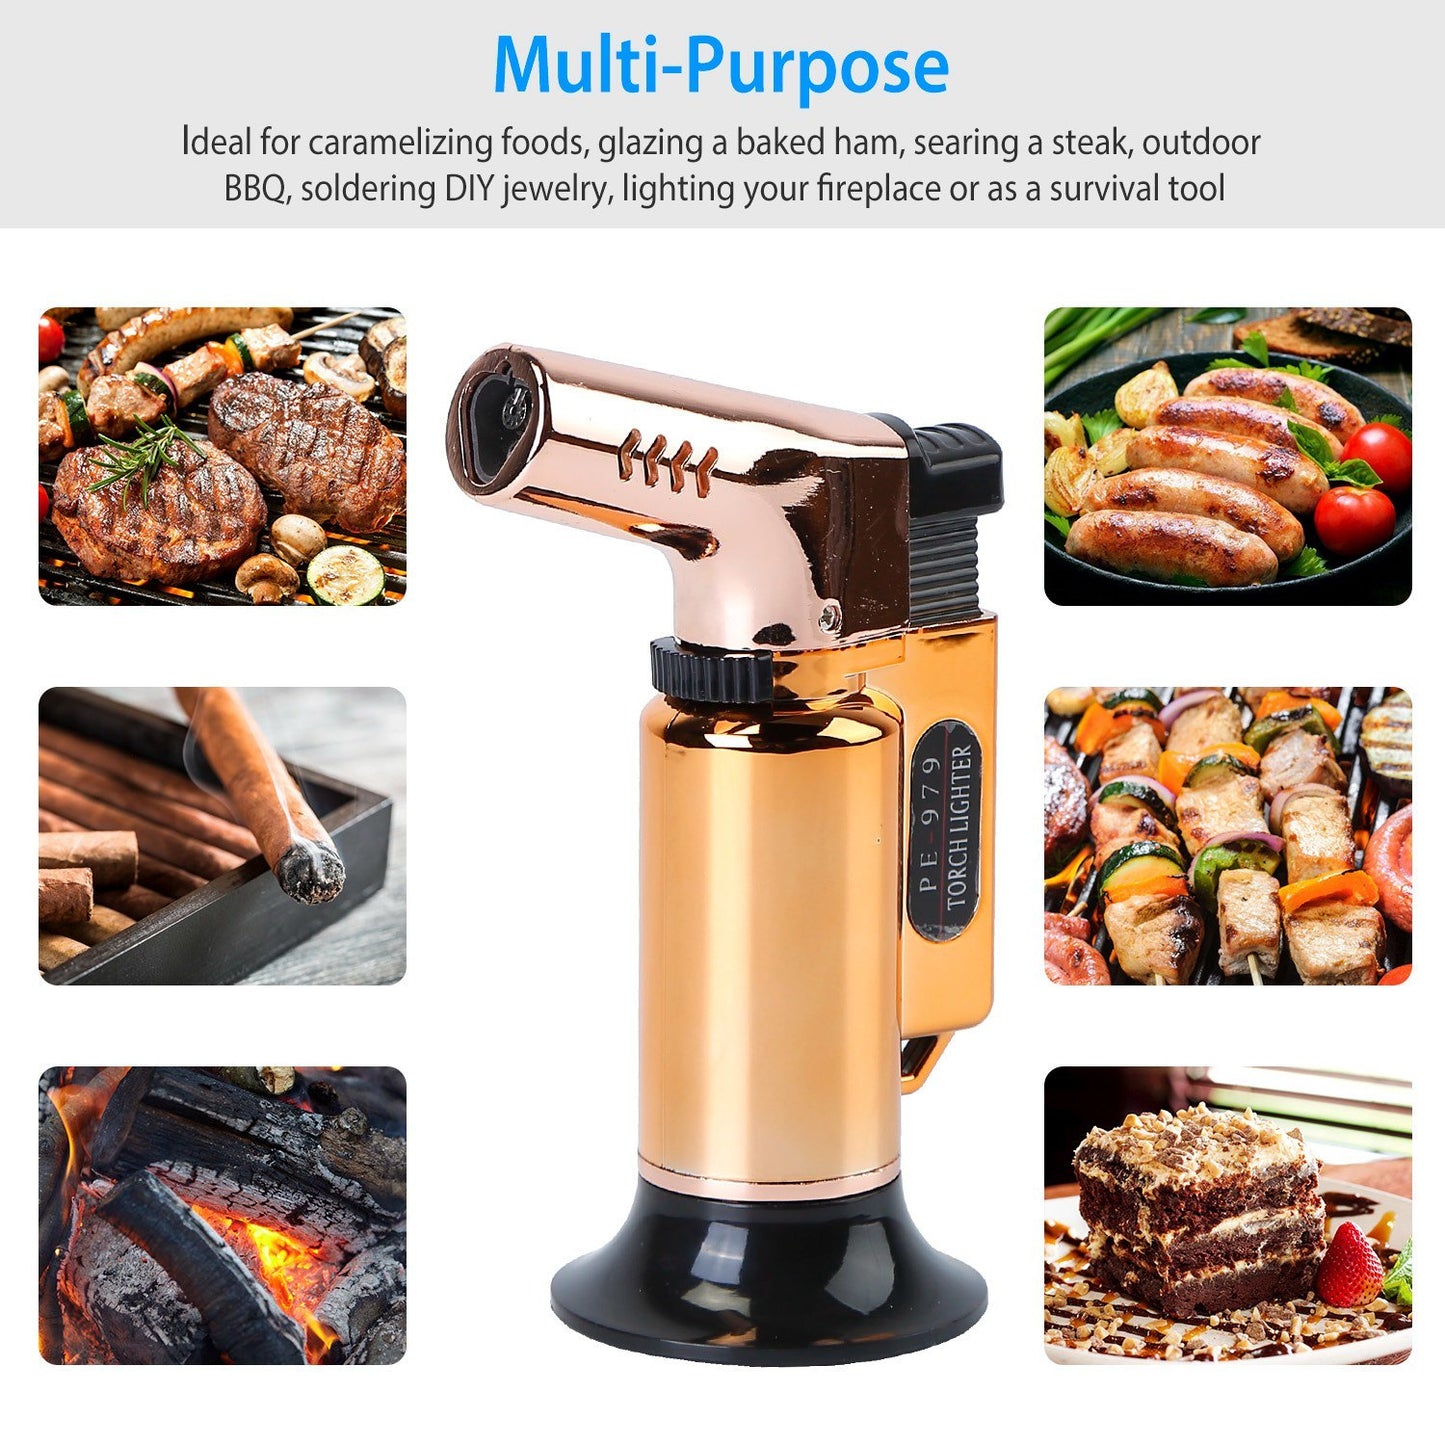 Culinary Butane Torch Lighter Refillable Blow Torch Adjustable Flame Kitchen Cooking BBQ Torch  (Gas Not Included)